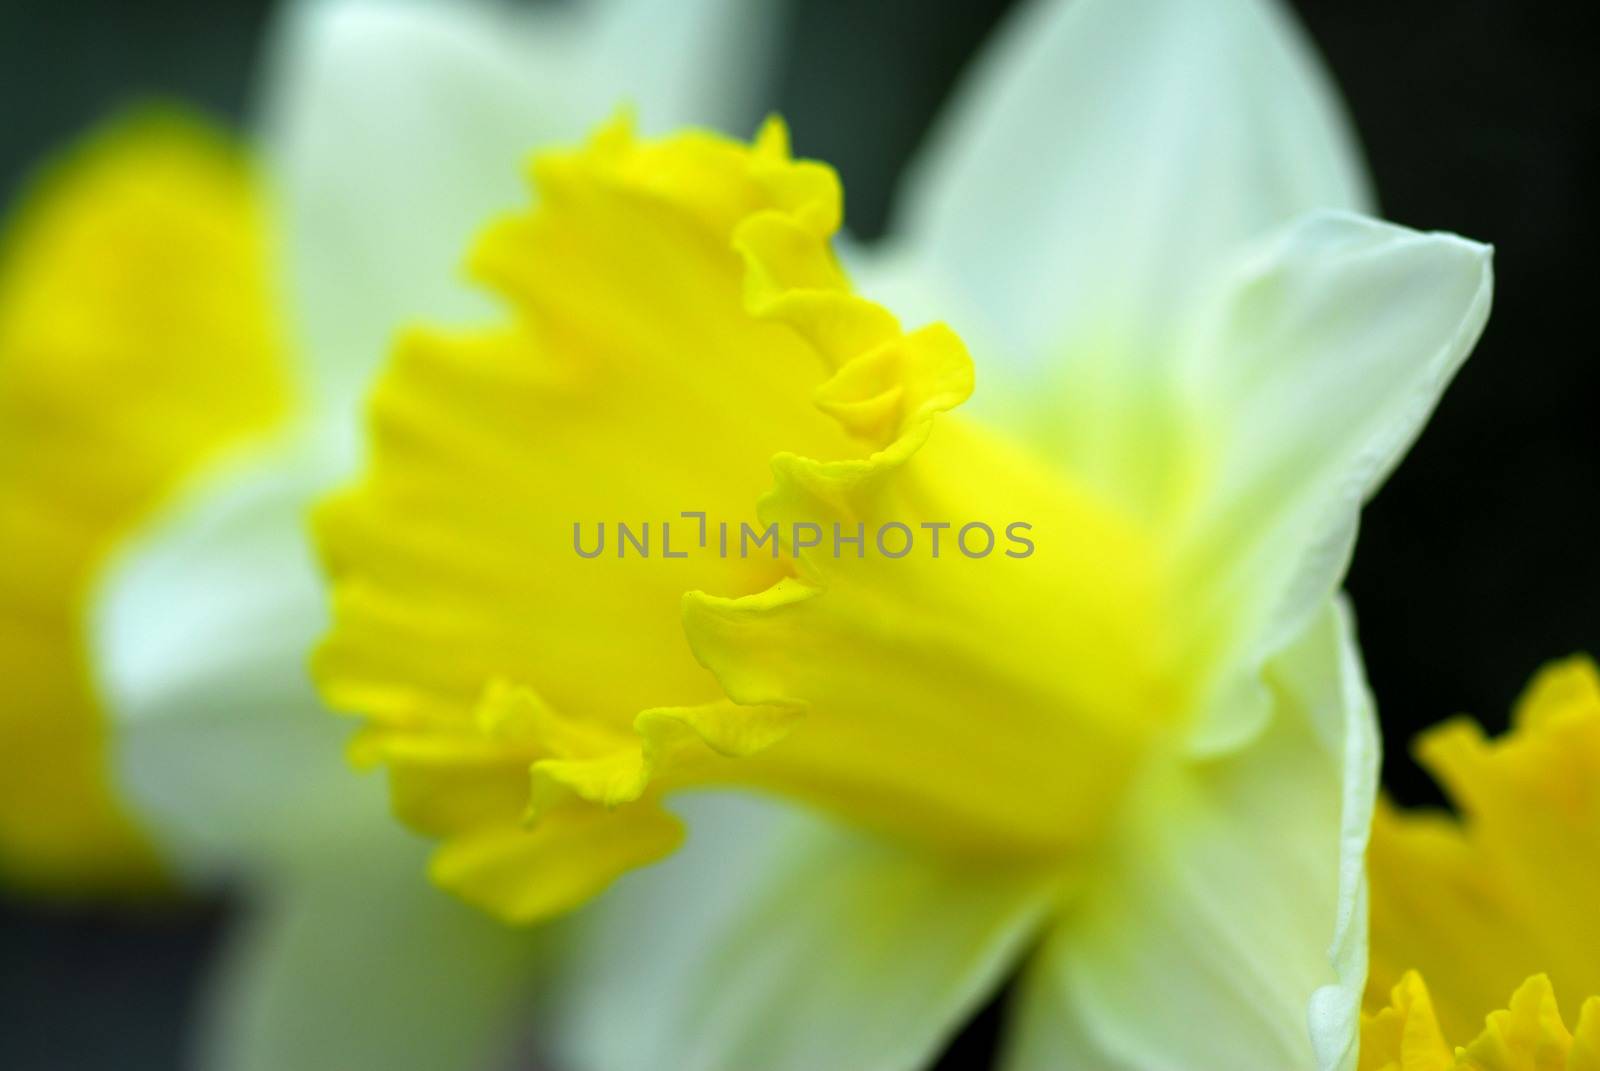 Daffodil Narcissus yellow flower in bloom in spring